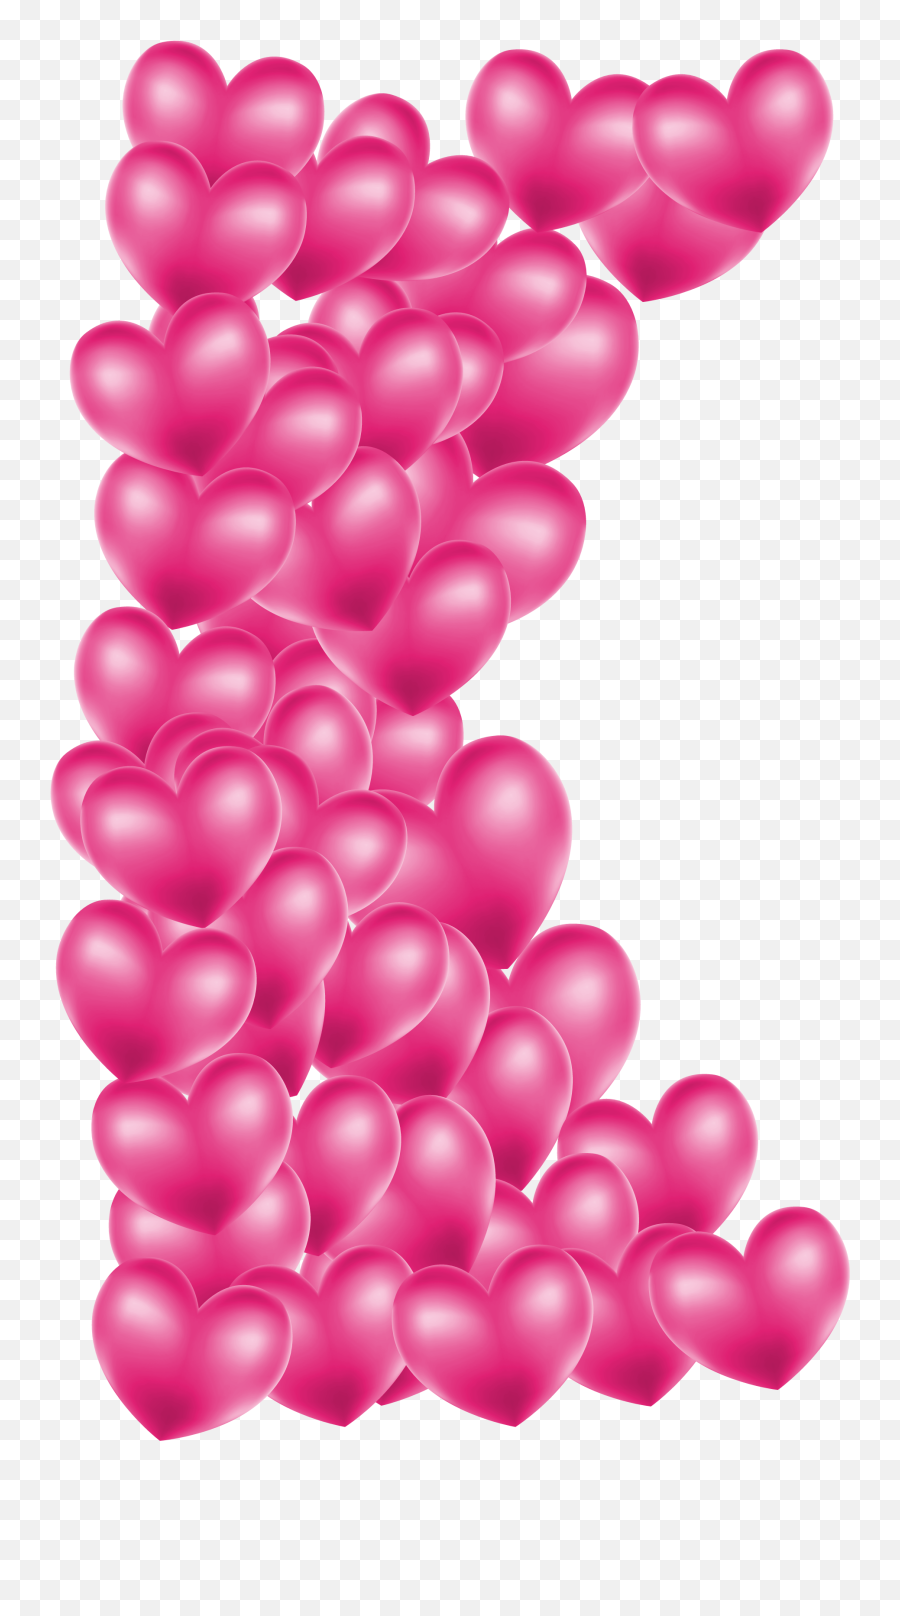 Valentines Day Pink Hearts Decor Png Clipart Heart Emoji,Caring Clipart